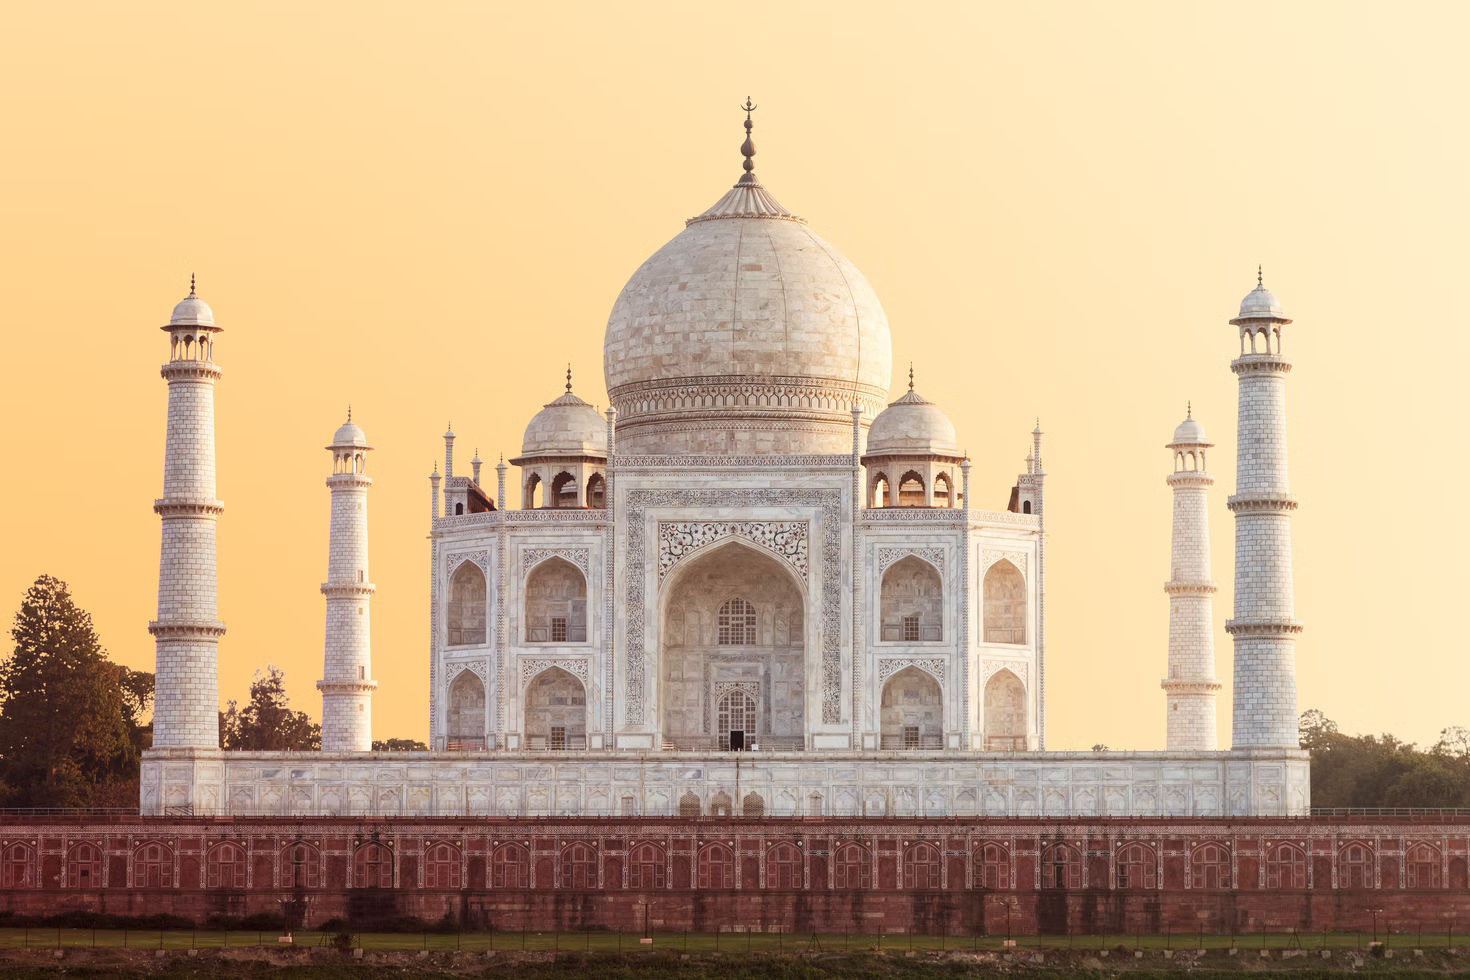 Amazon Quiz: Under which special provision is this monument protected from pollution?